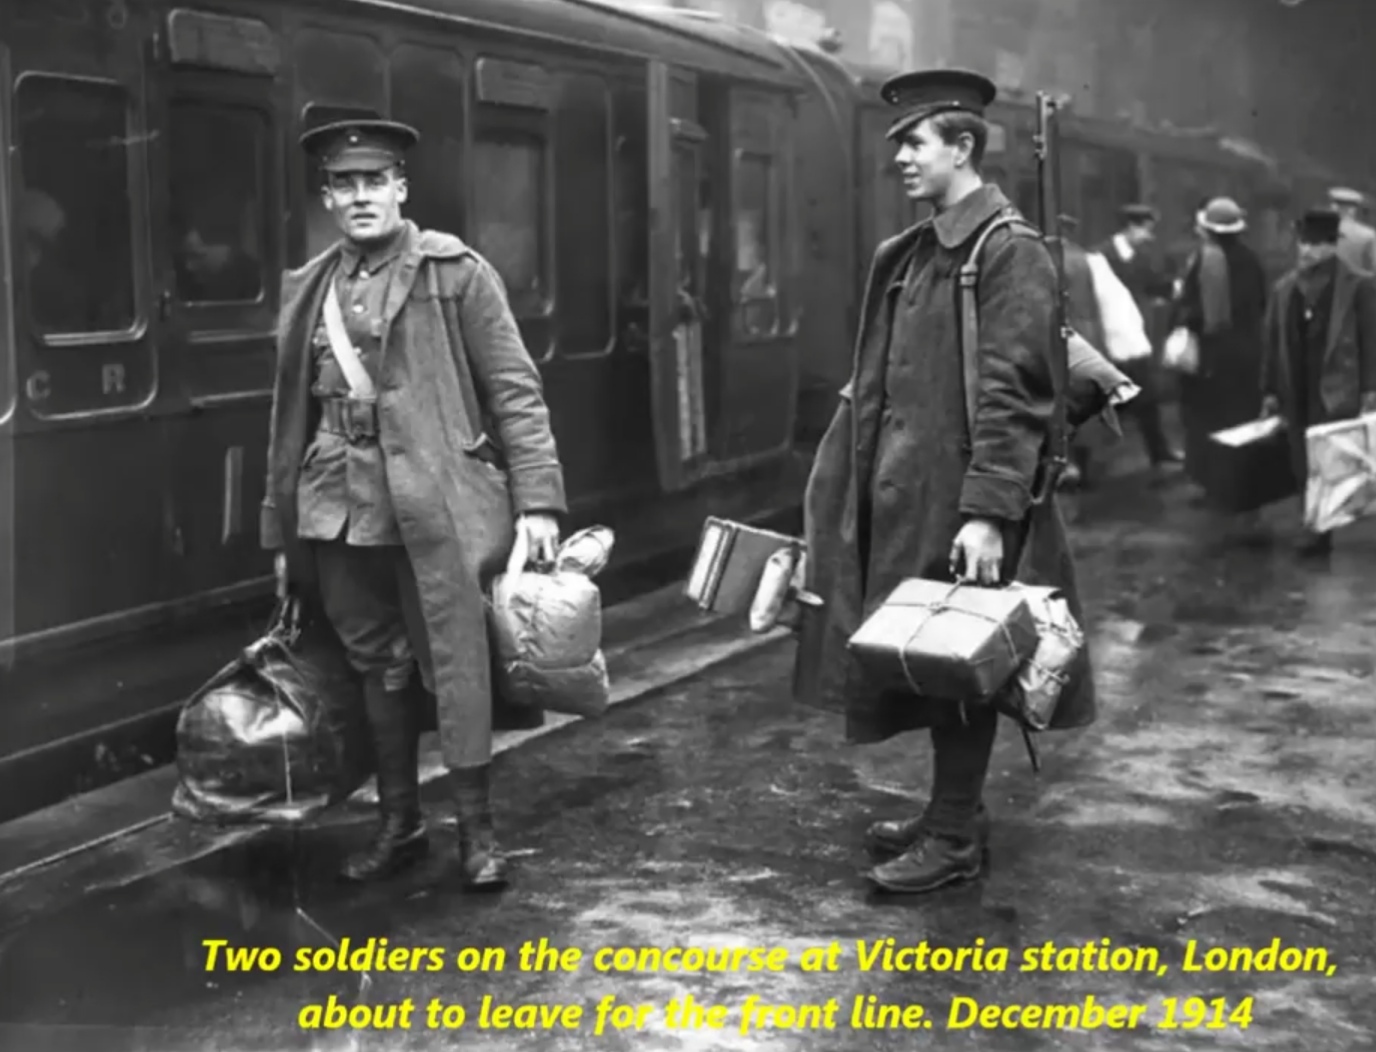 men leaving for war - Two soldiers on the concours at Victoria station, London, about to leave fo n t line.